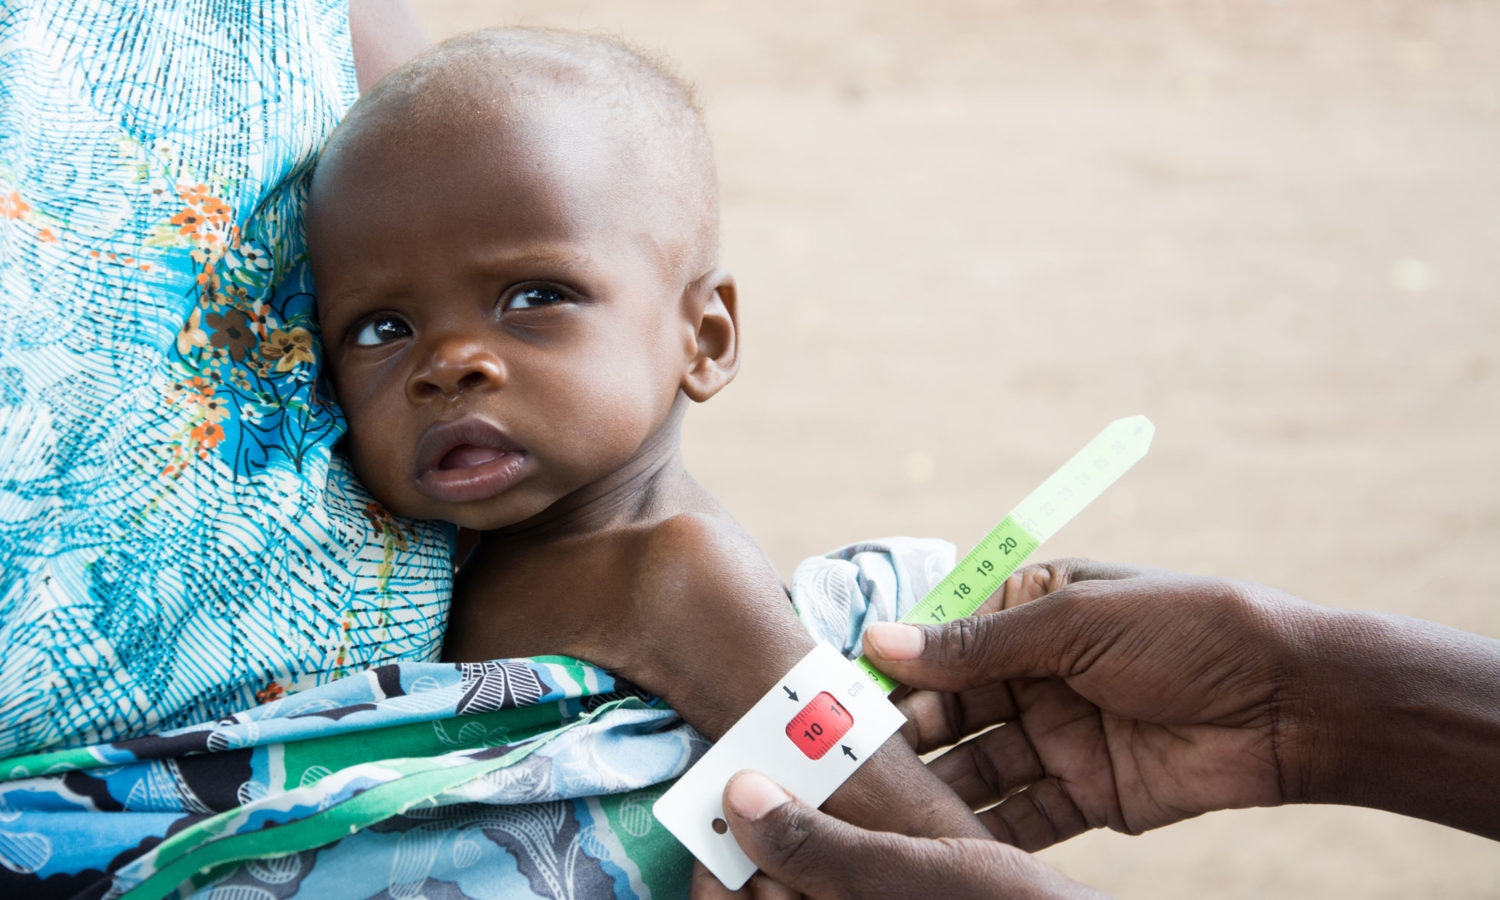 In Malawi, 7-month-old Regison’s arm measurement shows severe malnutrition. PLease donate and help Unicef reach more children affected by the food crisis.